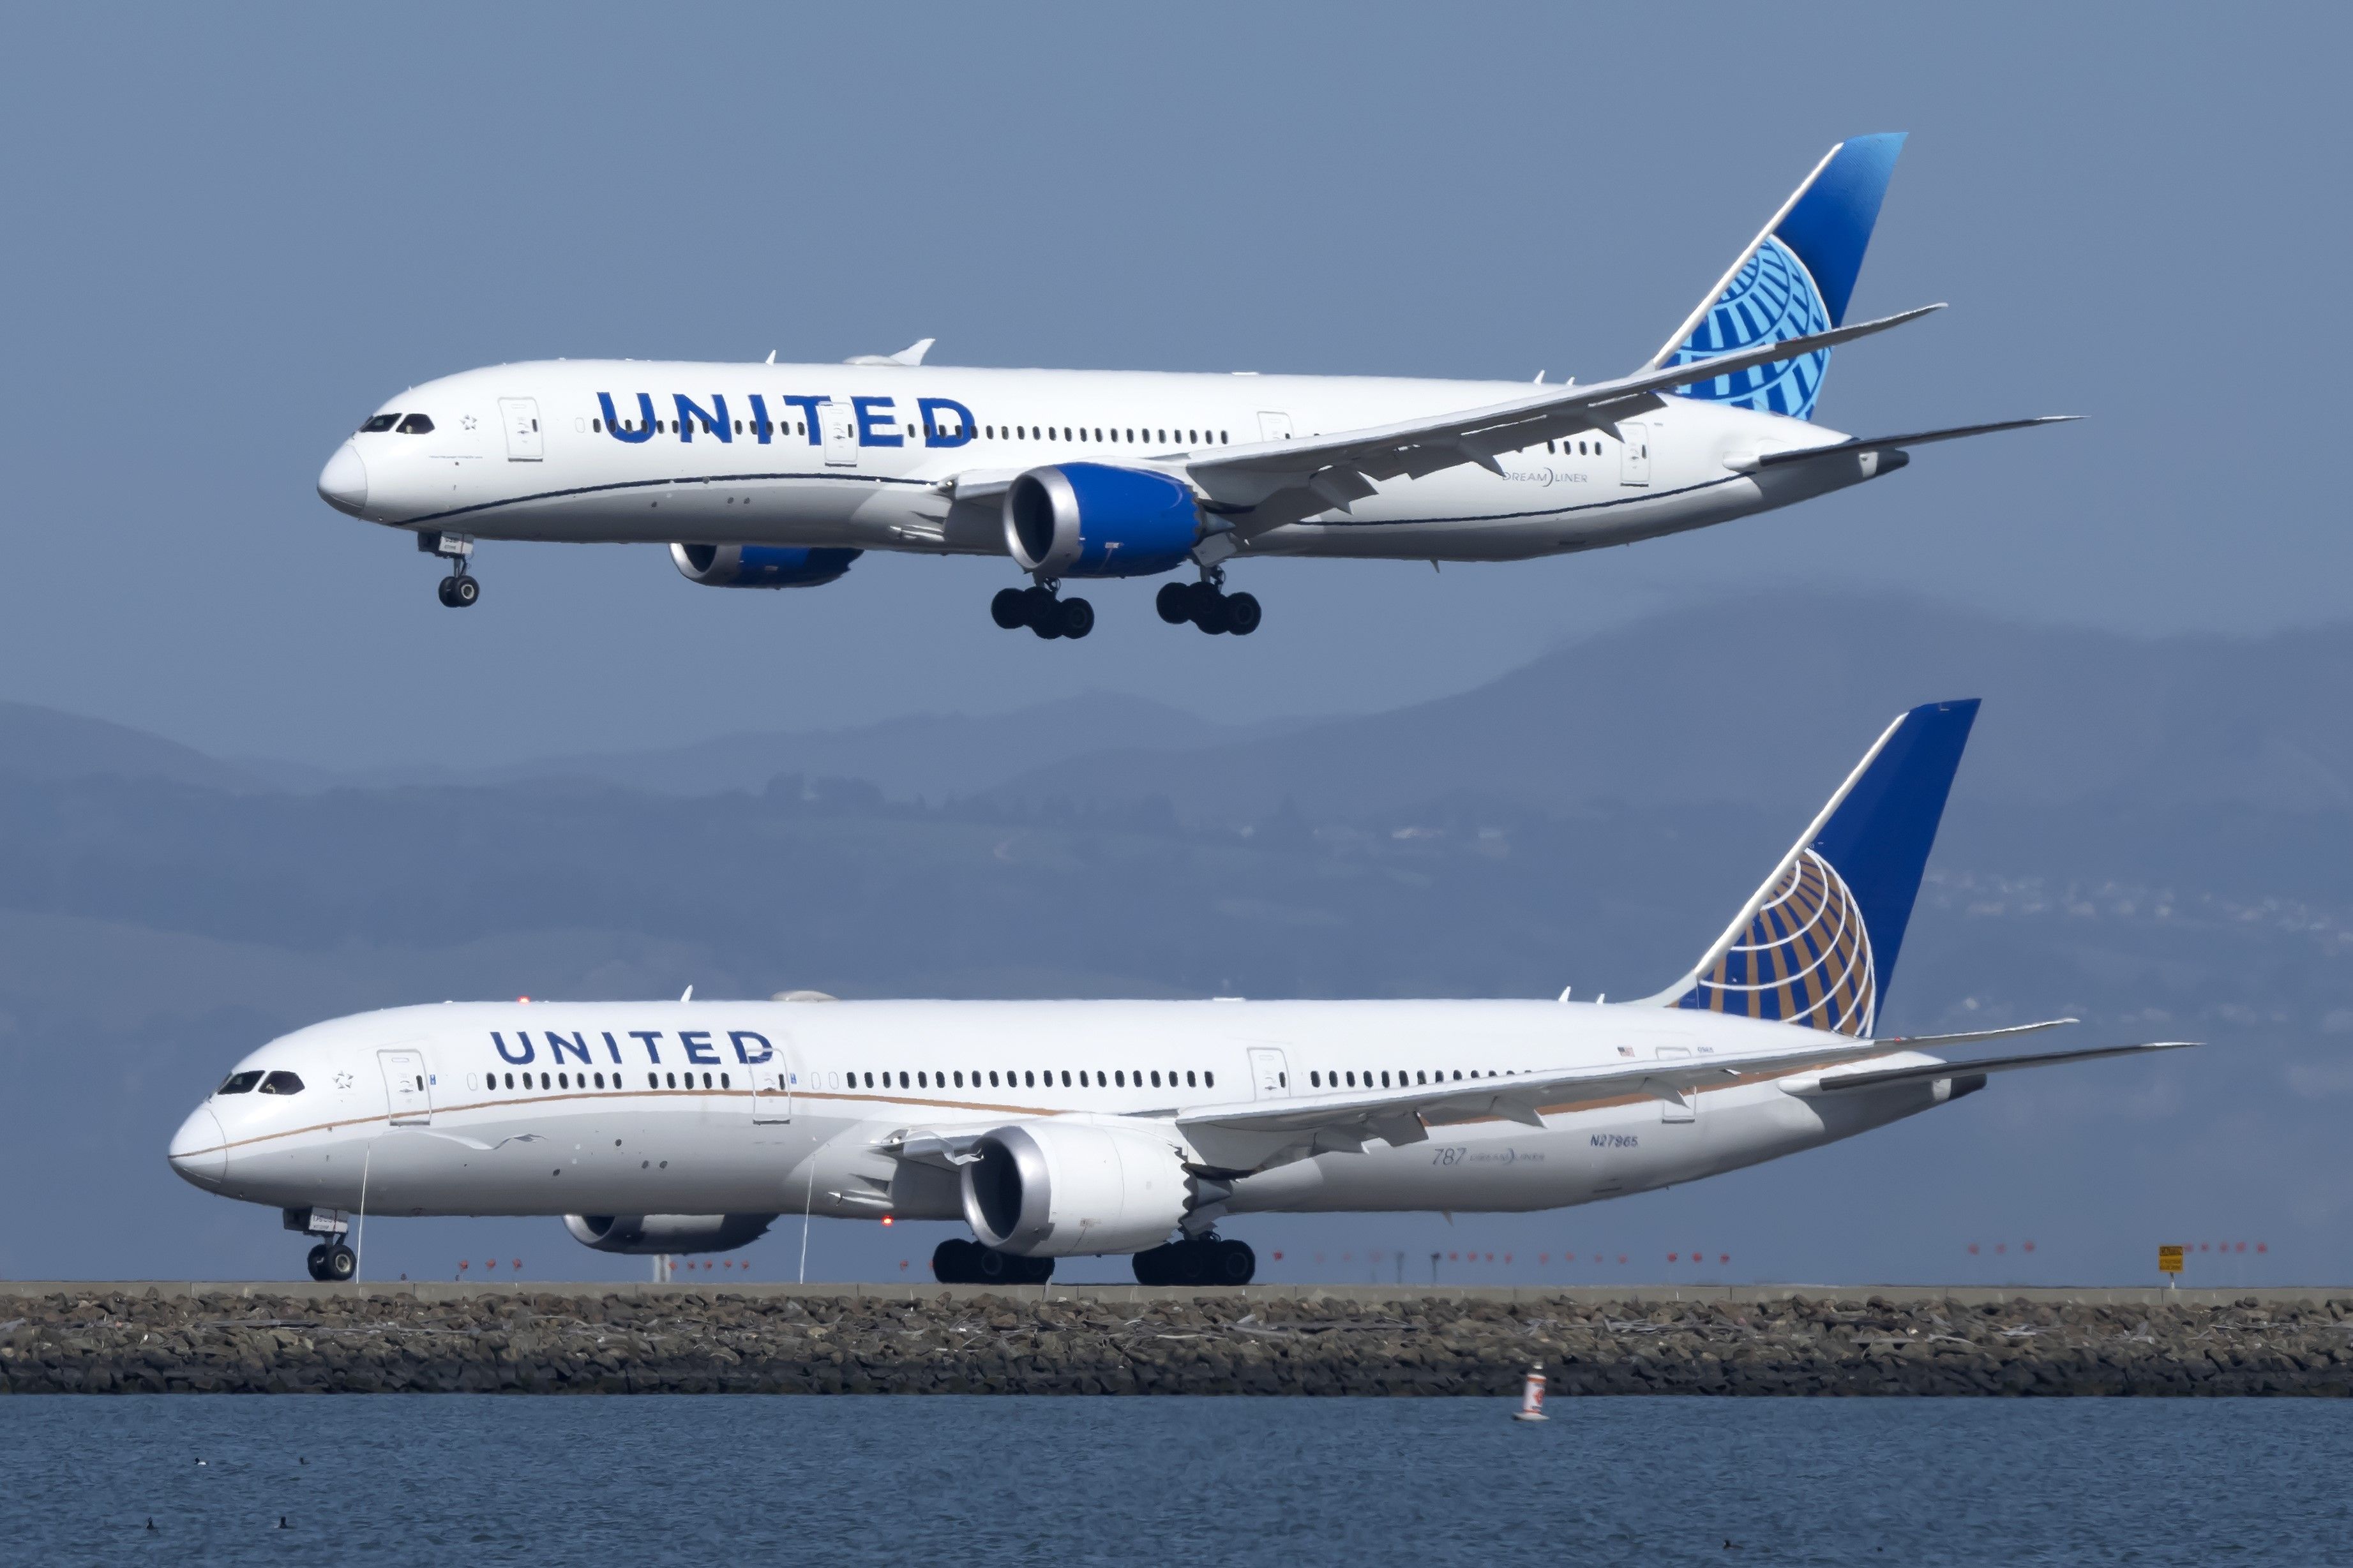 Two United Airlines aircraft, one on a taxiway and another about to land on a runway.